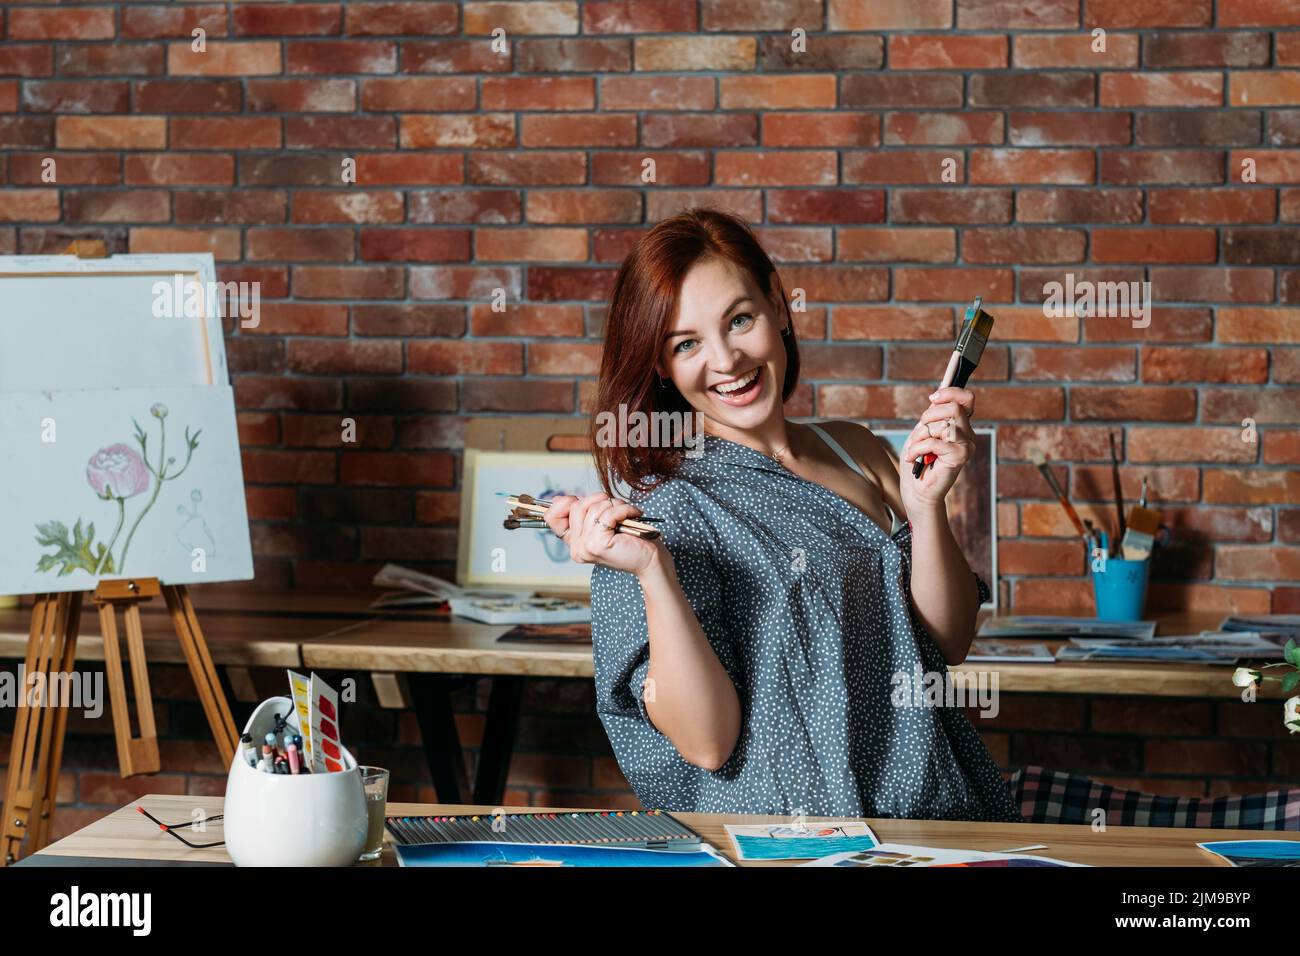 art therapy stress relief female extend paintbrush Stock Photo